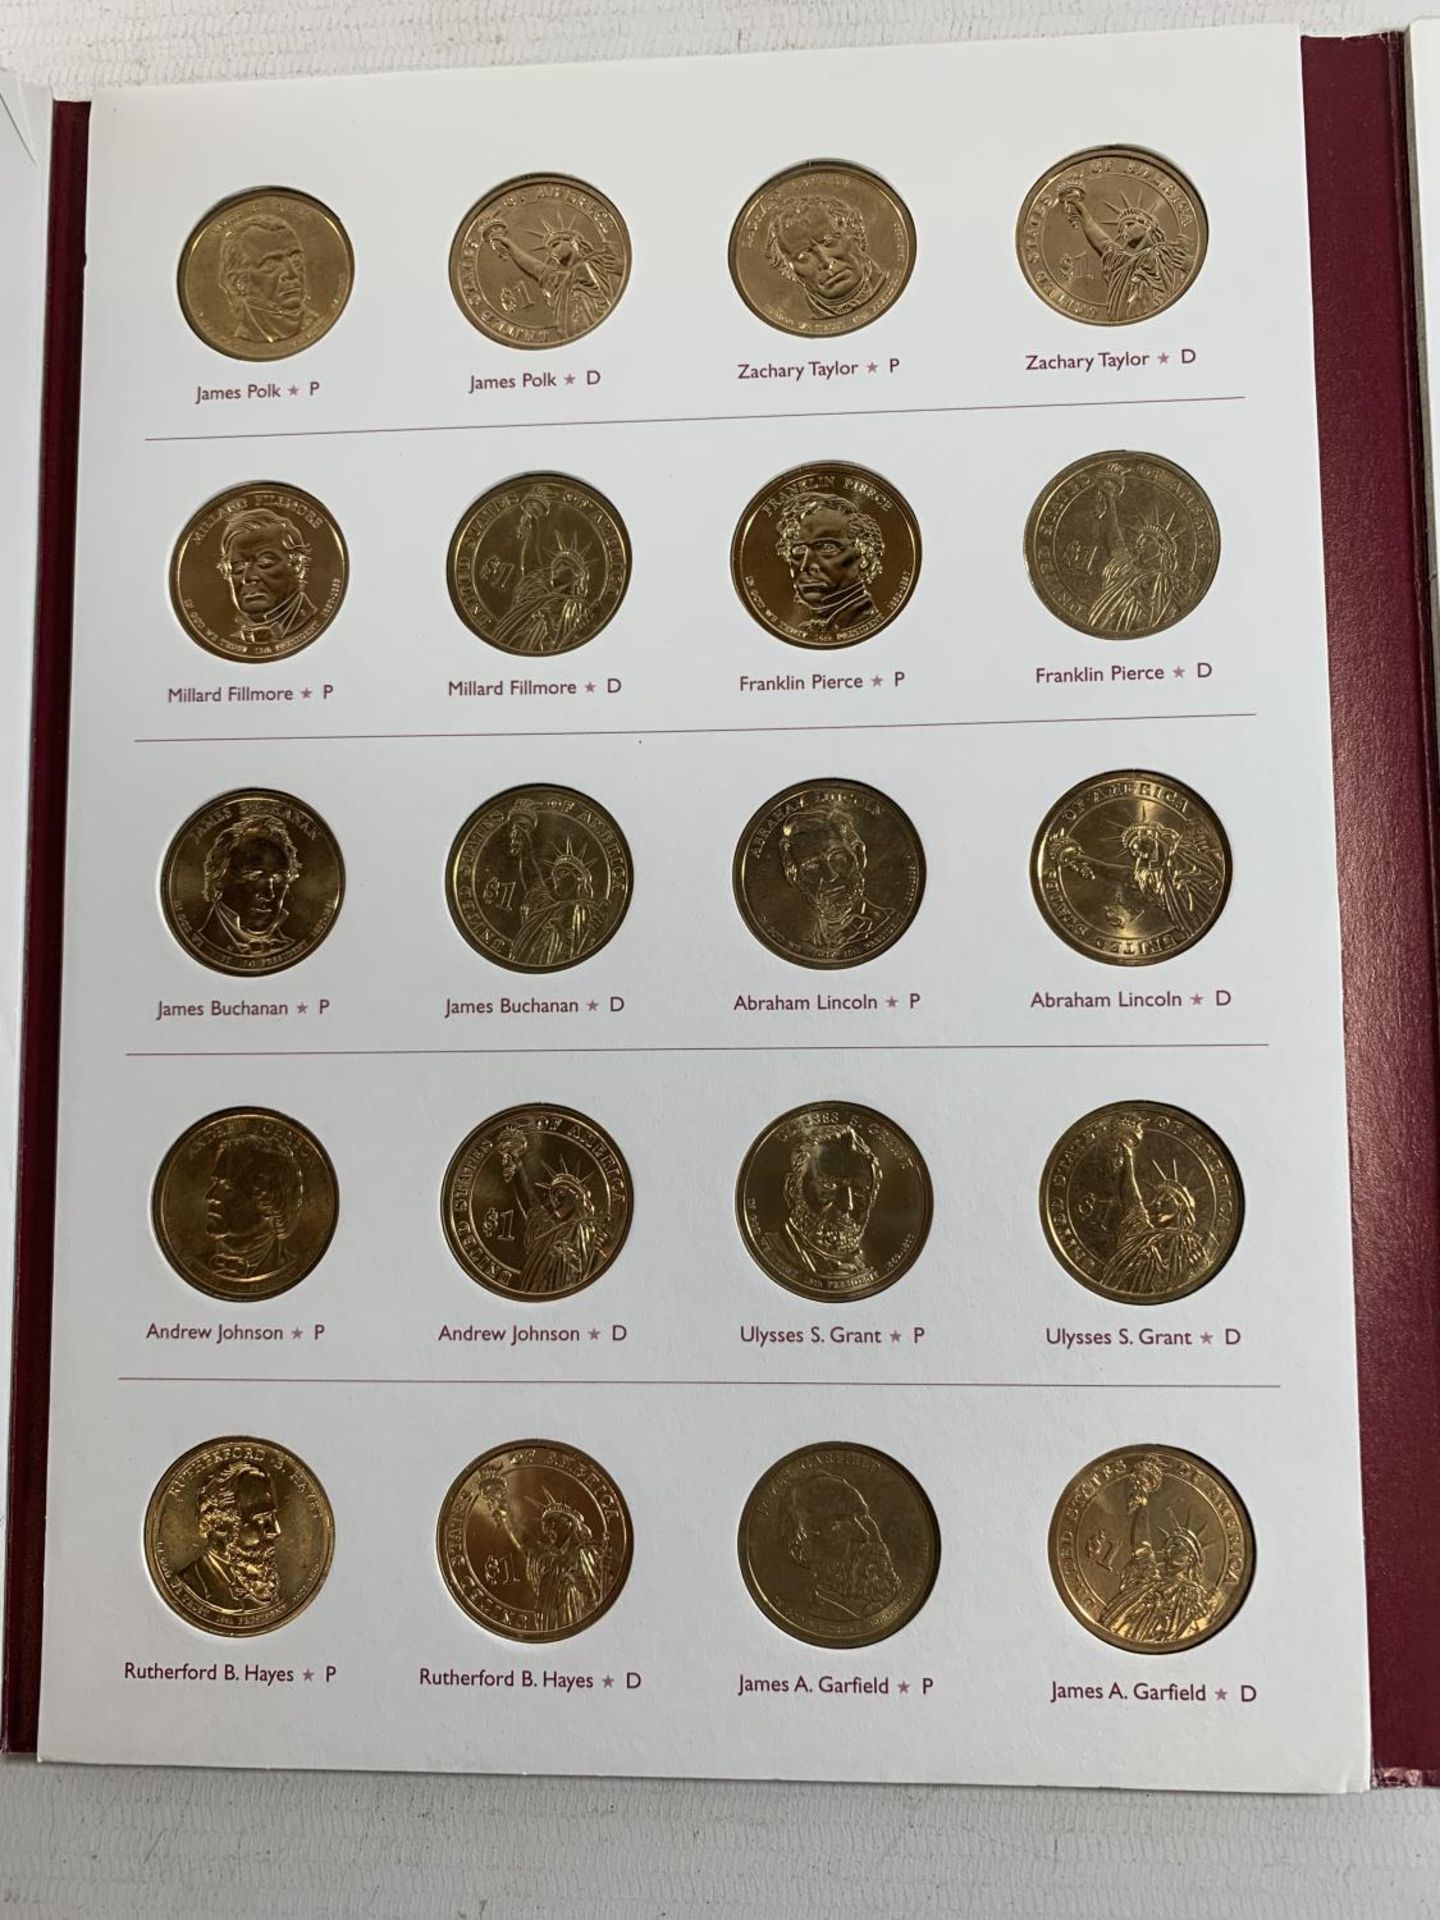 A PRESIDENTIAL DOLLAR COLLECTOR'S FOLDER - Image 4 of 4